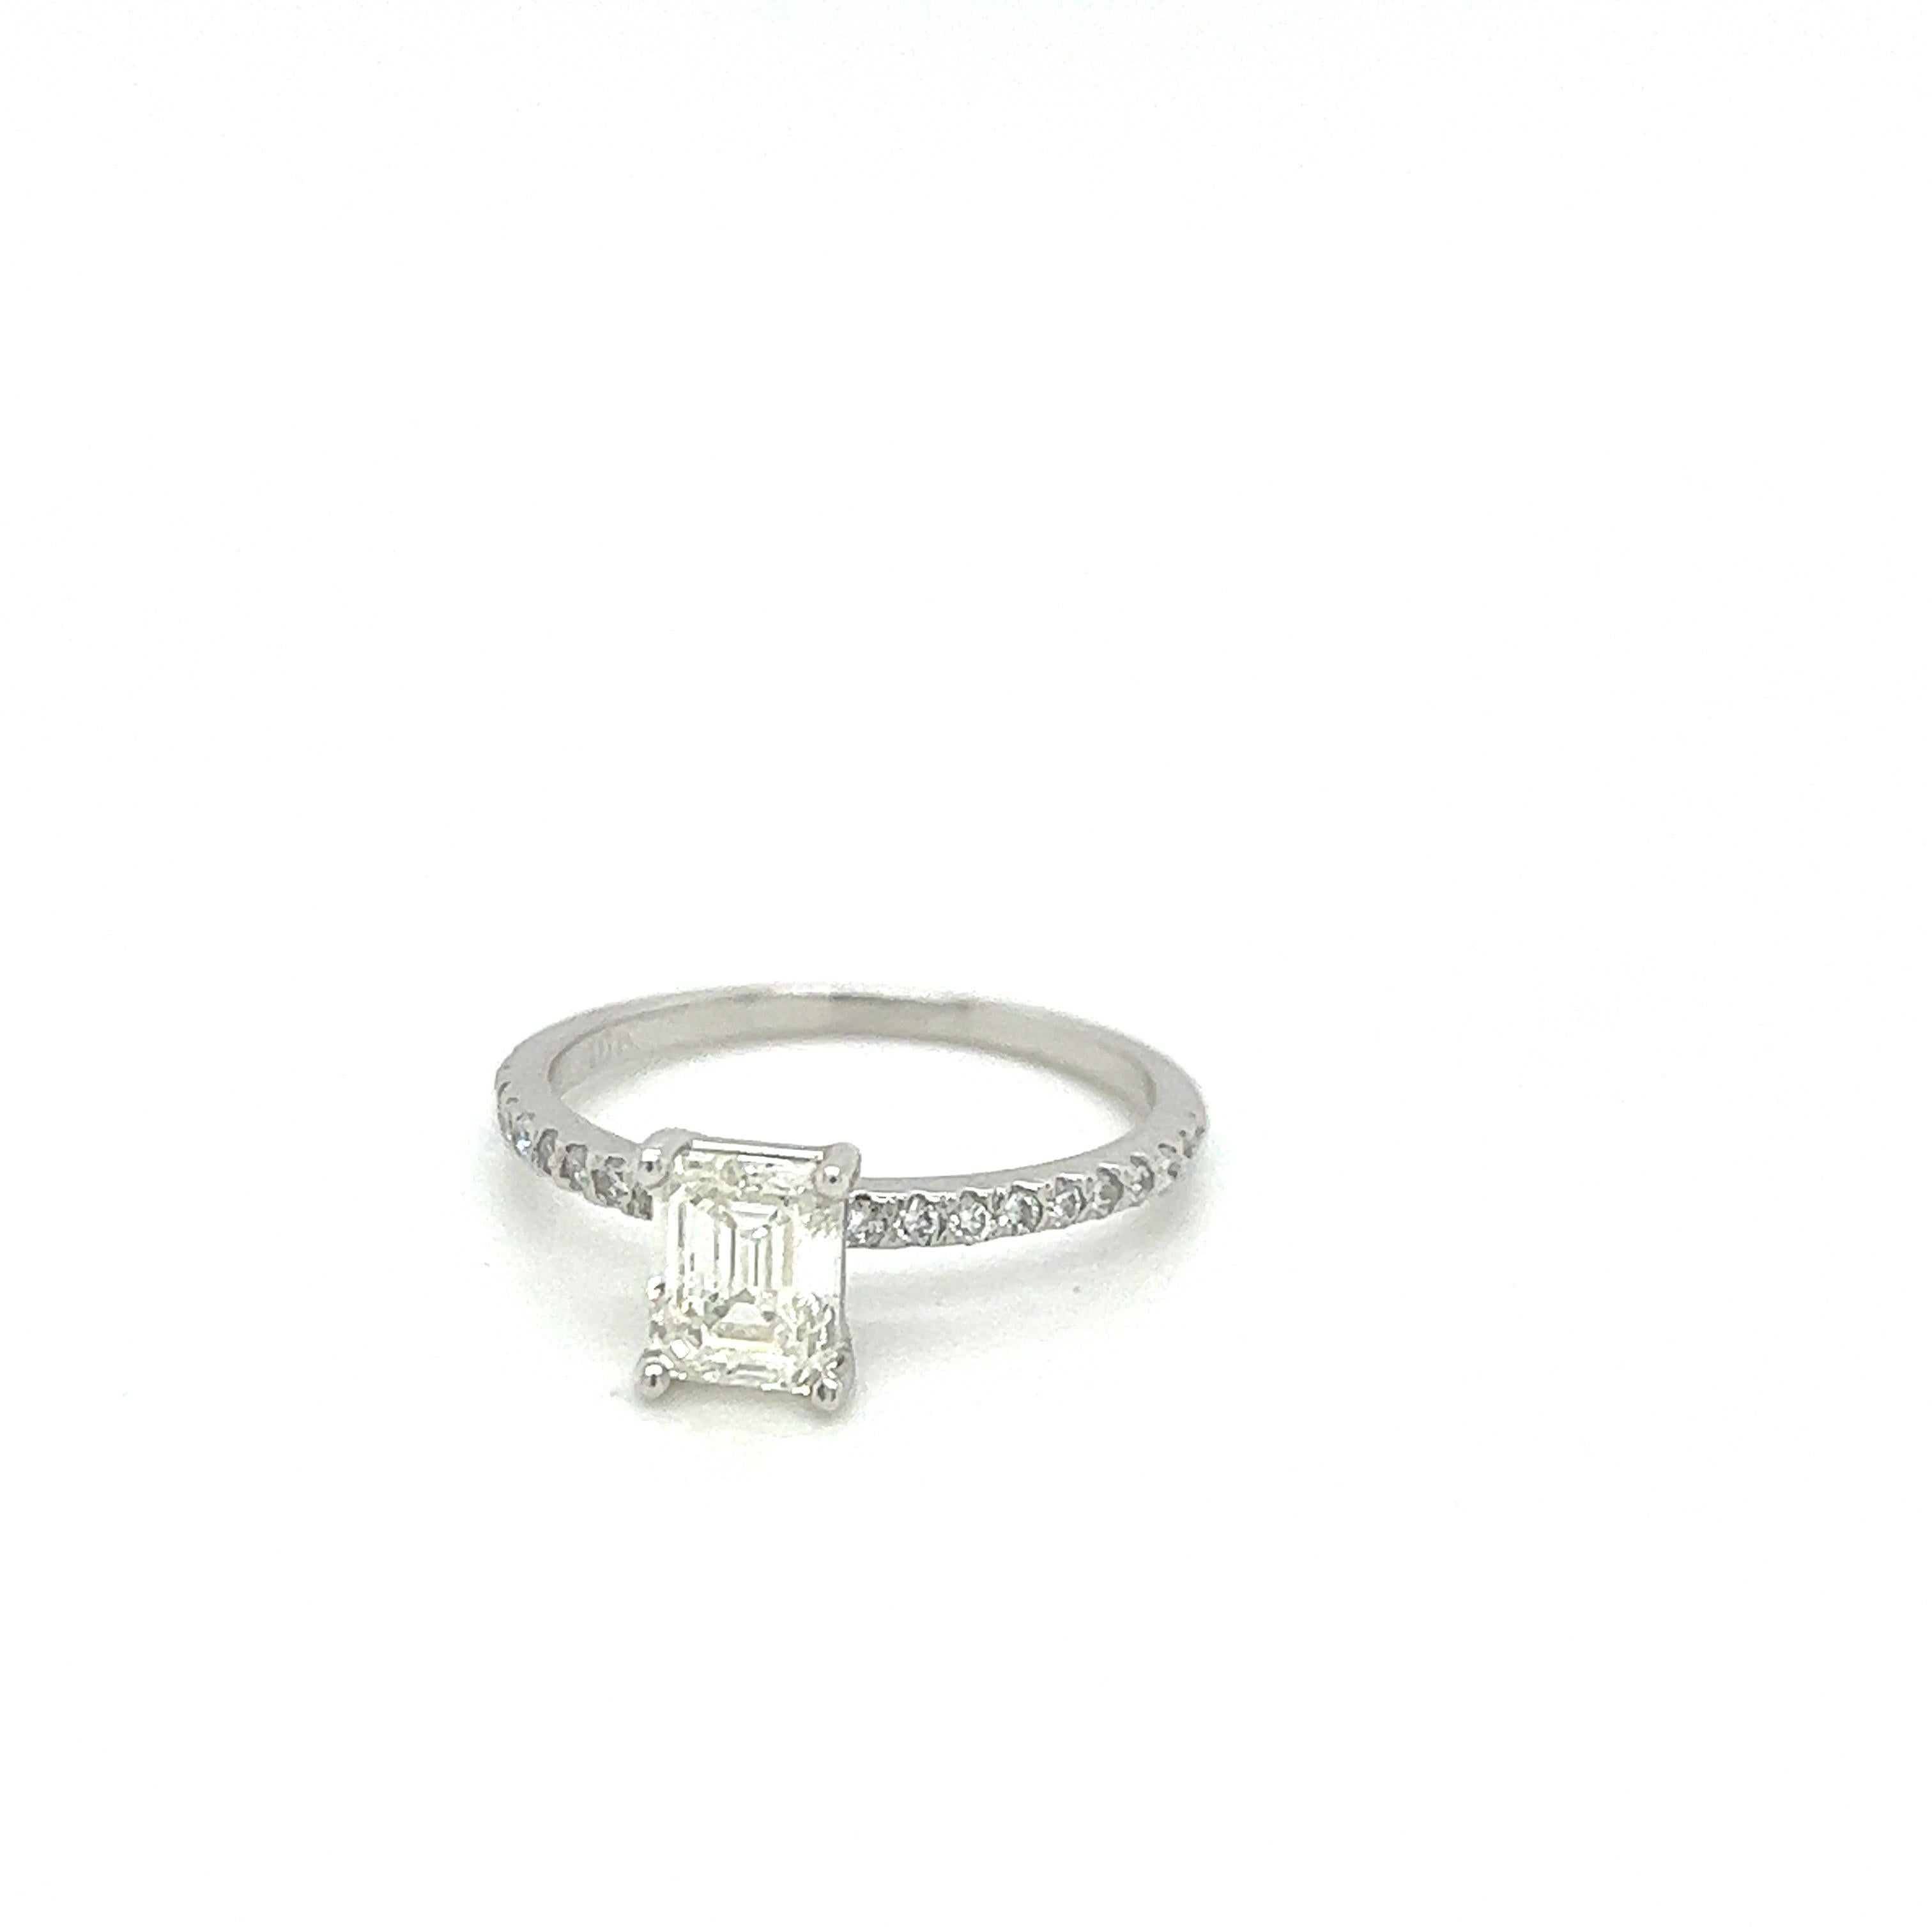 Emerald Cut Diamond 1.29ctw Engagement Ring in 18kt White Gold In Excellent Condition For Sale In Miami, FL